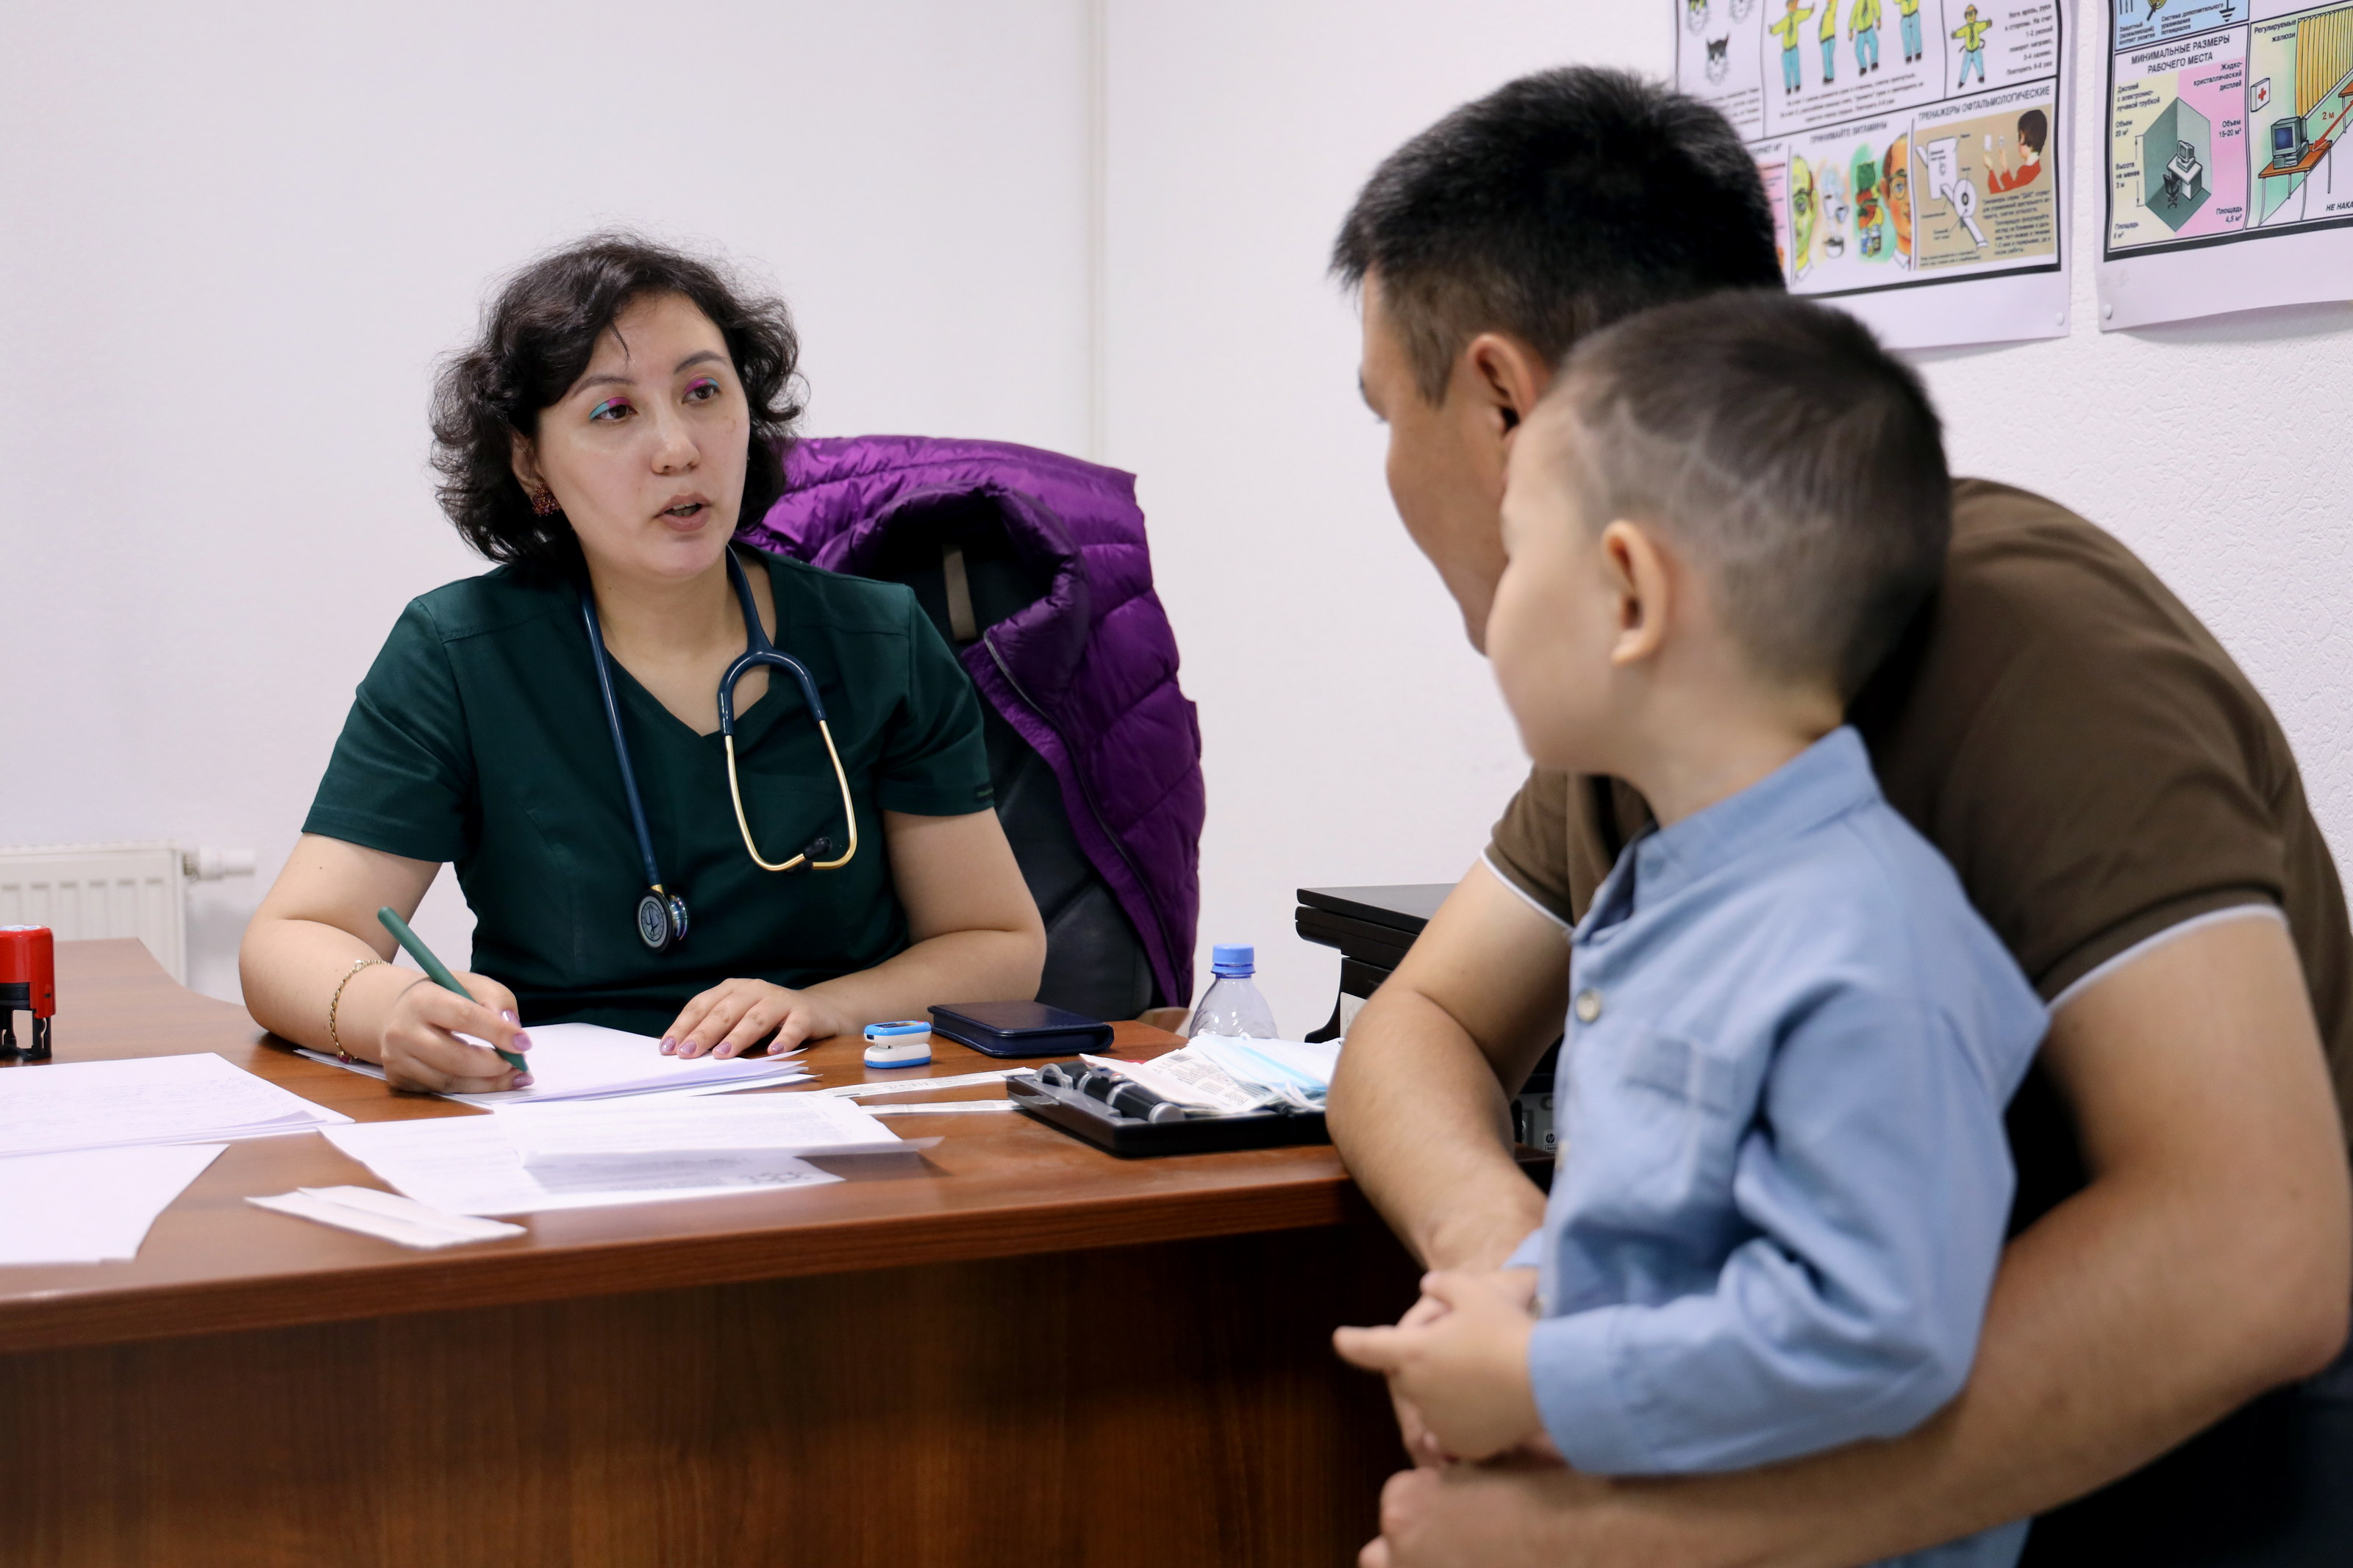 NCPDH doctors conducted a free examination of more than 100 children